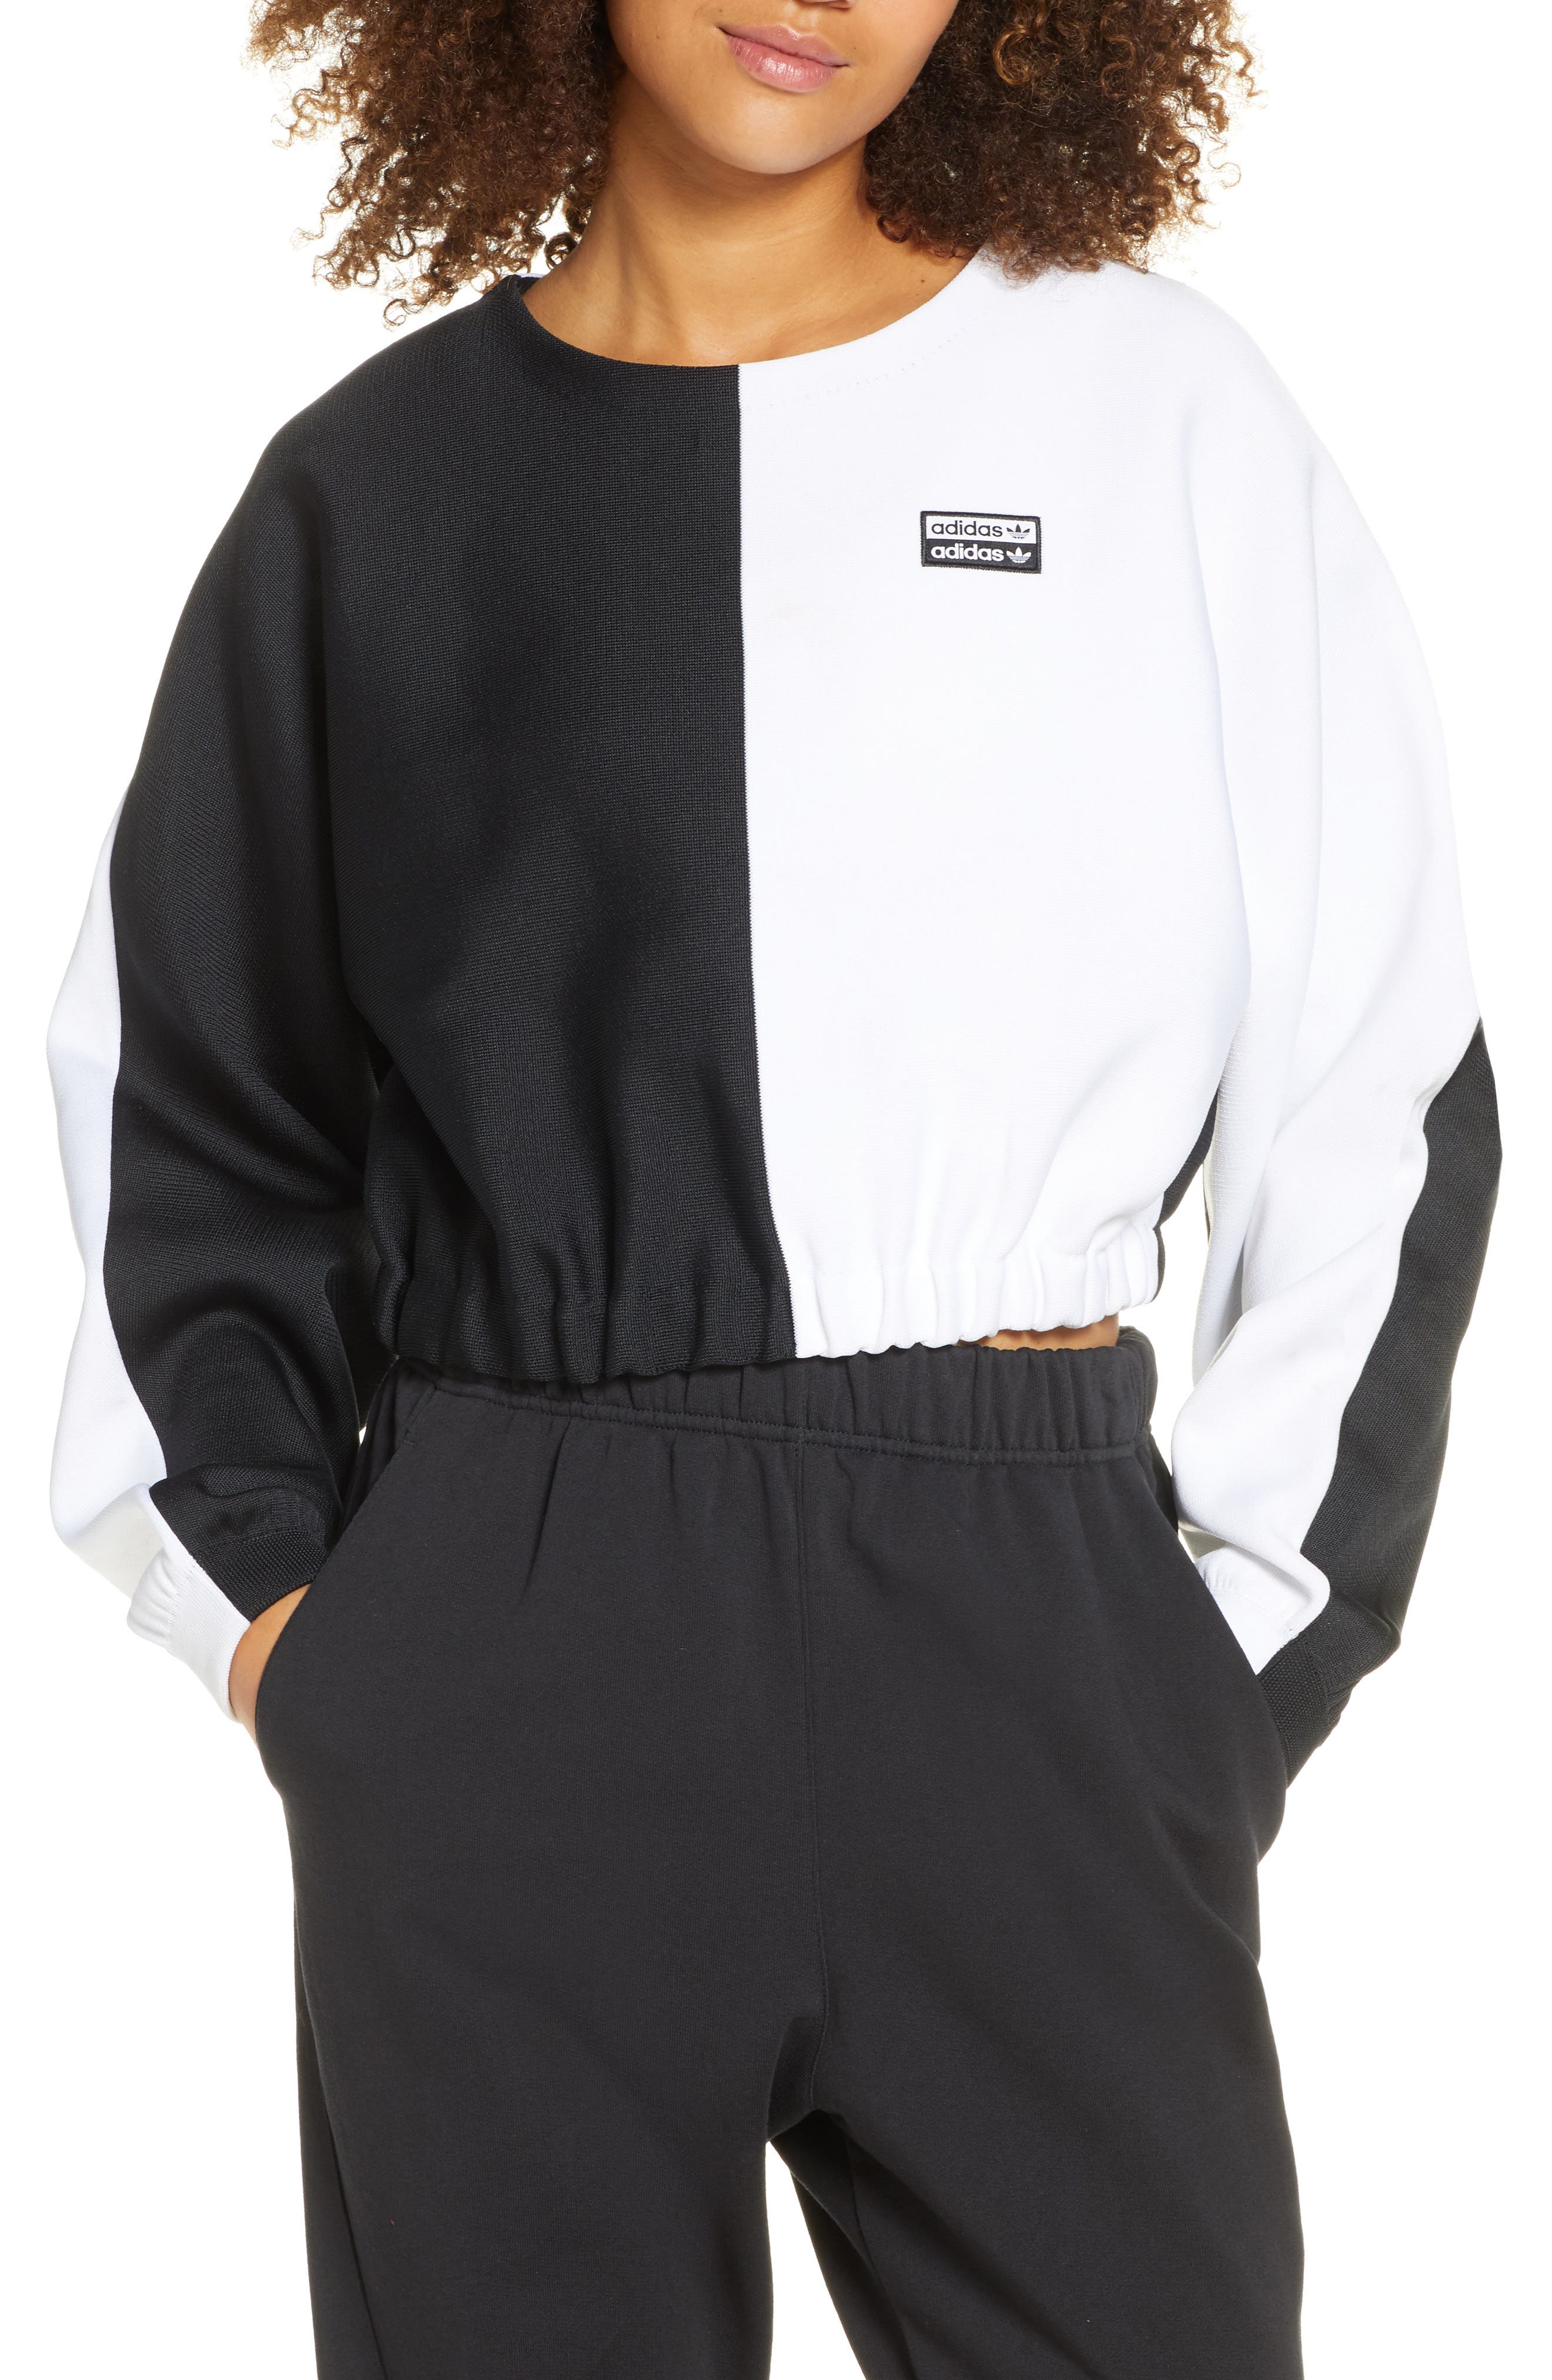 adidas originals two tone cropped sweatshirt in black and white